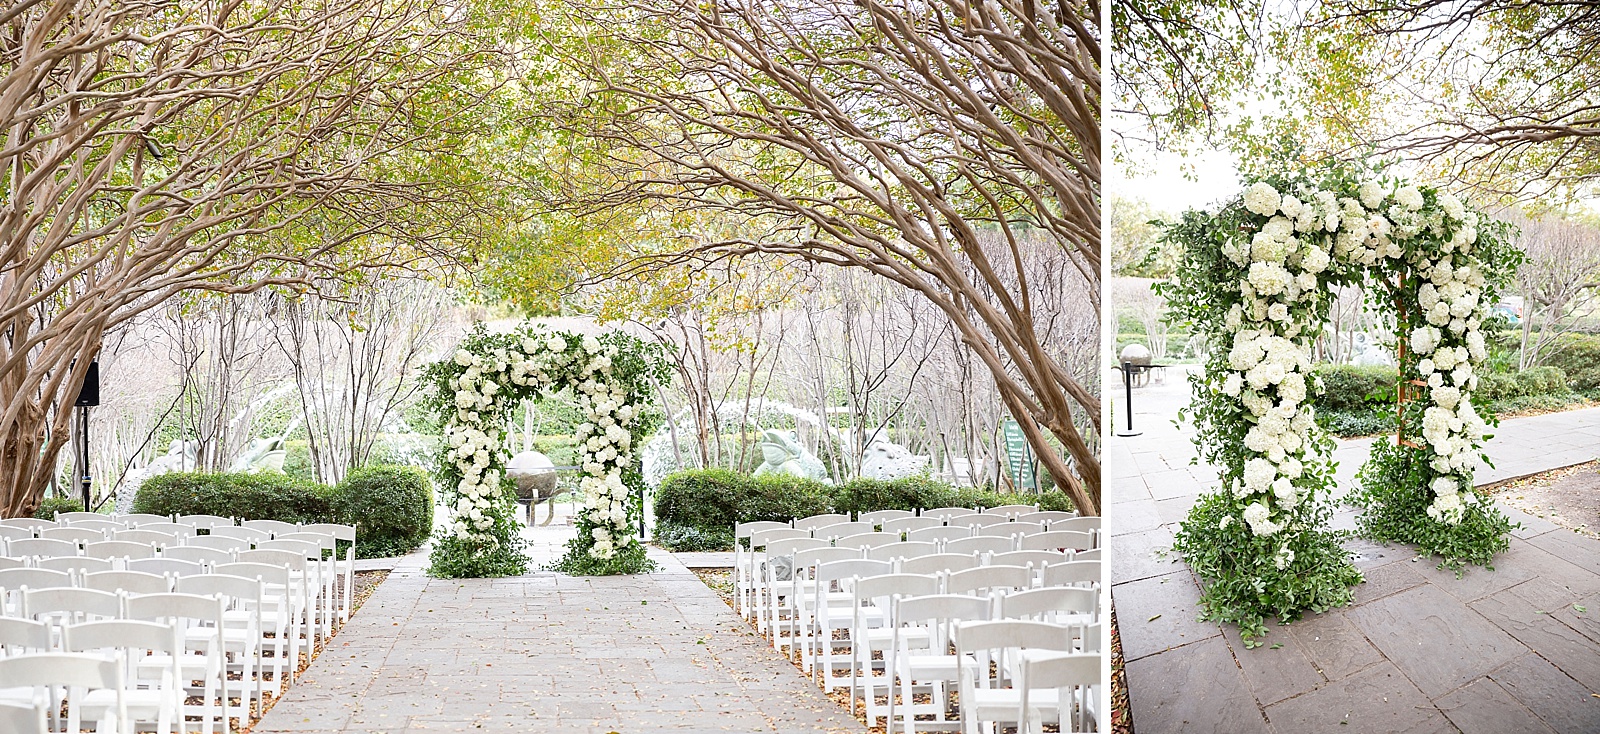 Blushington Blooms creates floral arch for ceremony photographed by Randi Michelle Photography